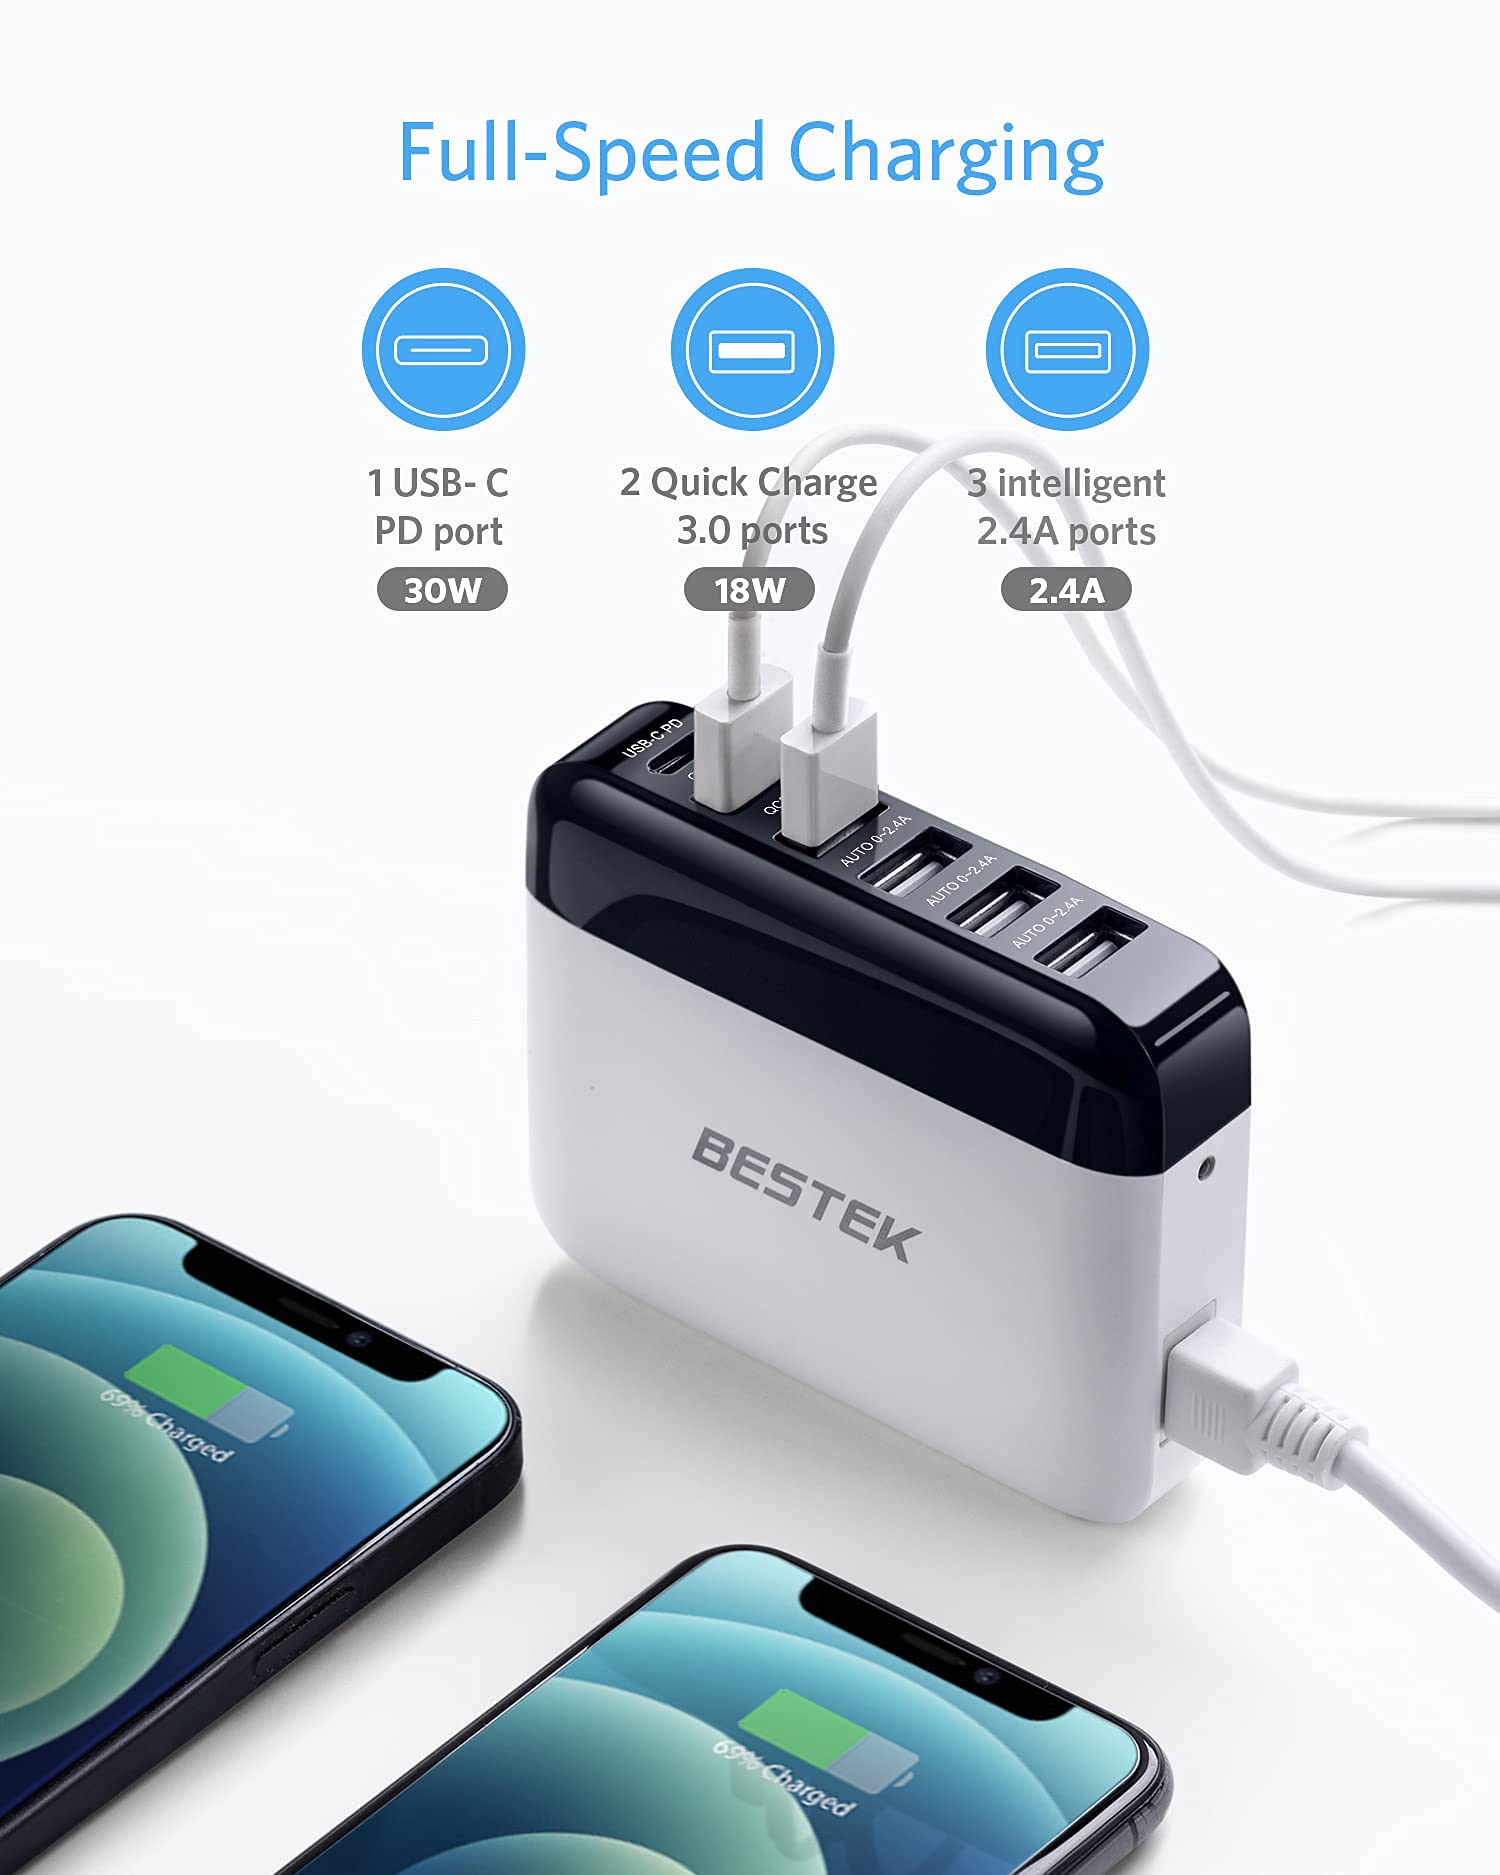 BESTEK Car Charger Adapter: 36W Dual Quick Charge QC 3.0 | 30W USB-C PD | 20W 3 USB Ports | 1.5m Cable Cigarette Lighter Plug for Mobile Phone Smart Table Laptop Vehicle Truck Van